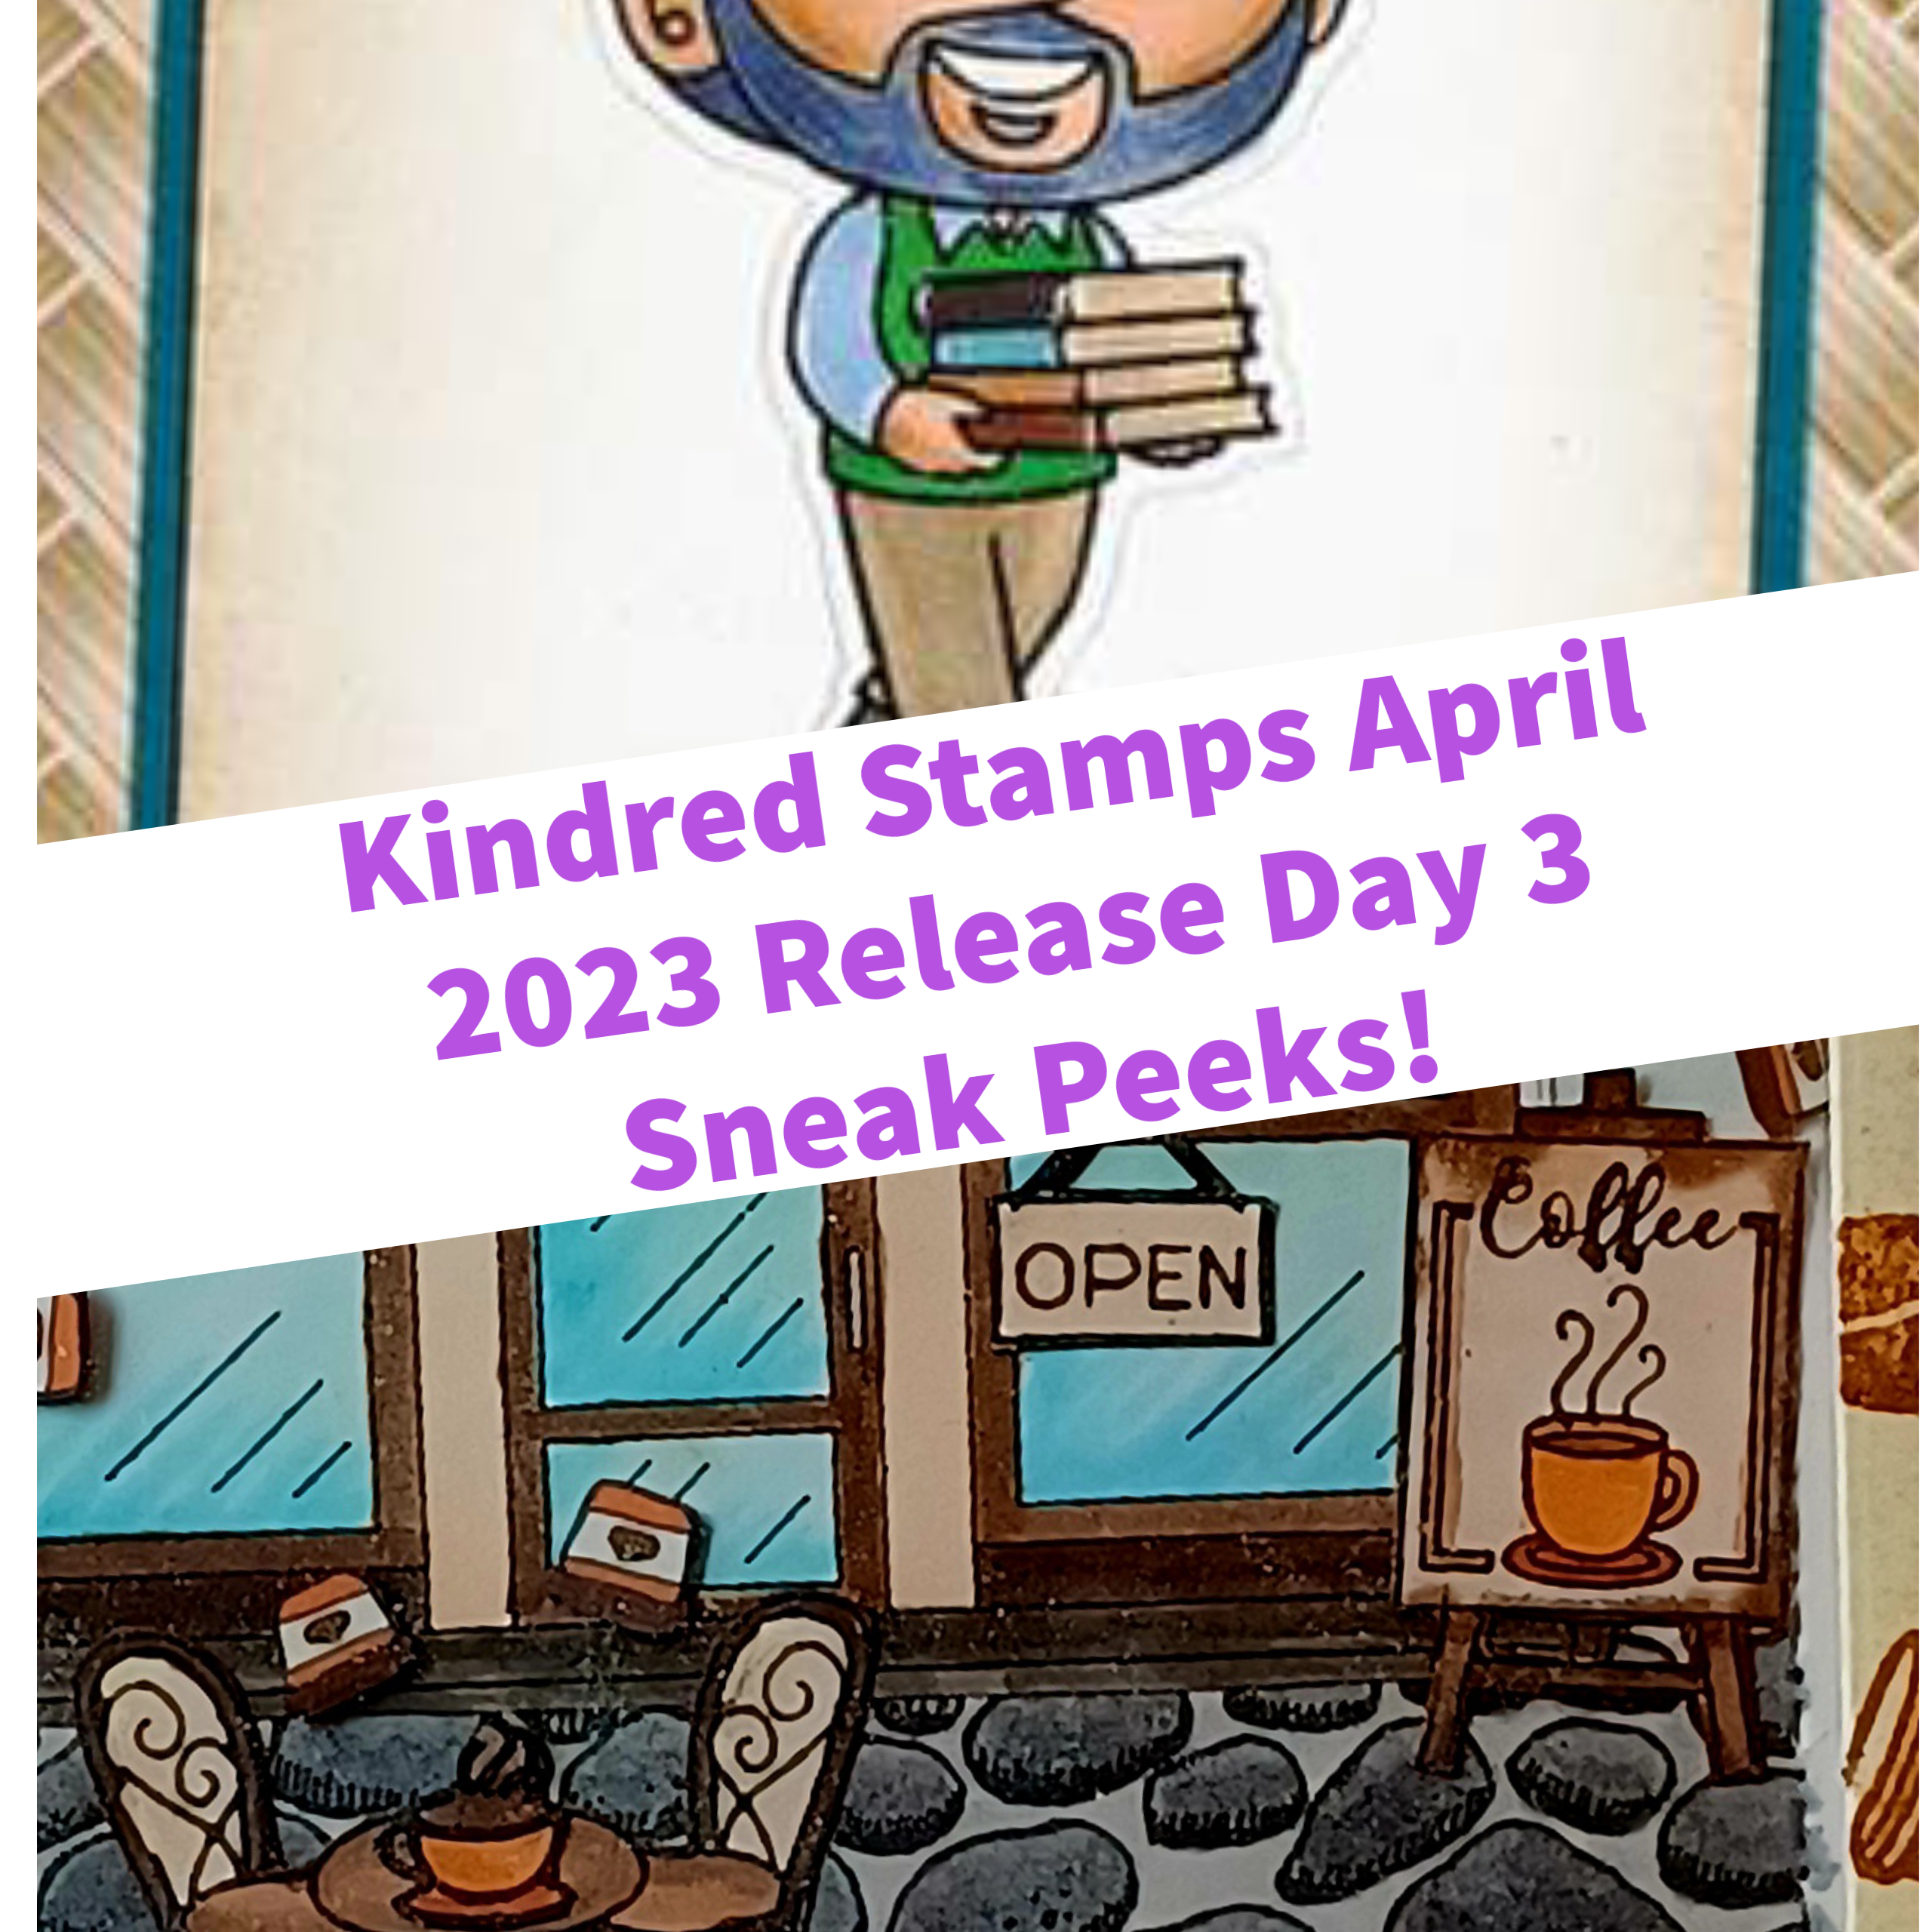 April Release Day 3 -"Career Day-Books" and "Kindred Town-Cafe Vibes"